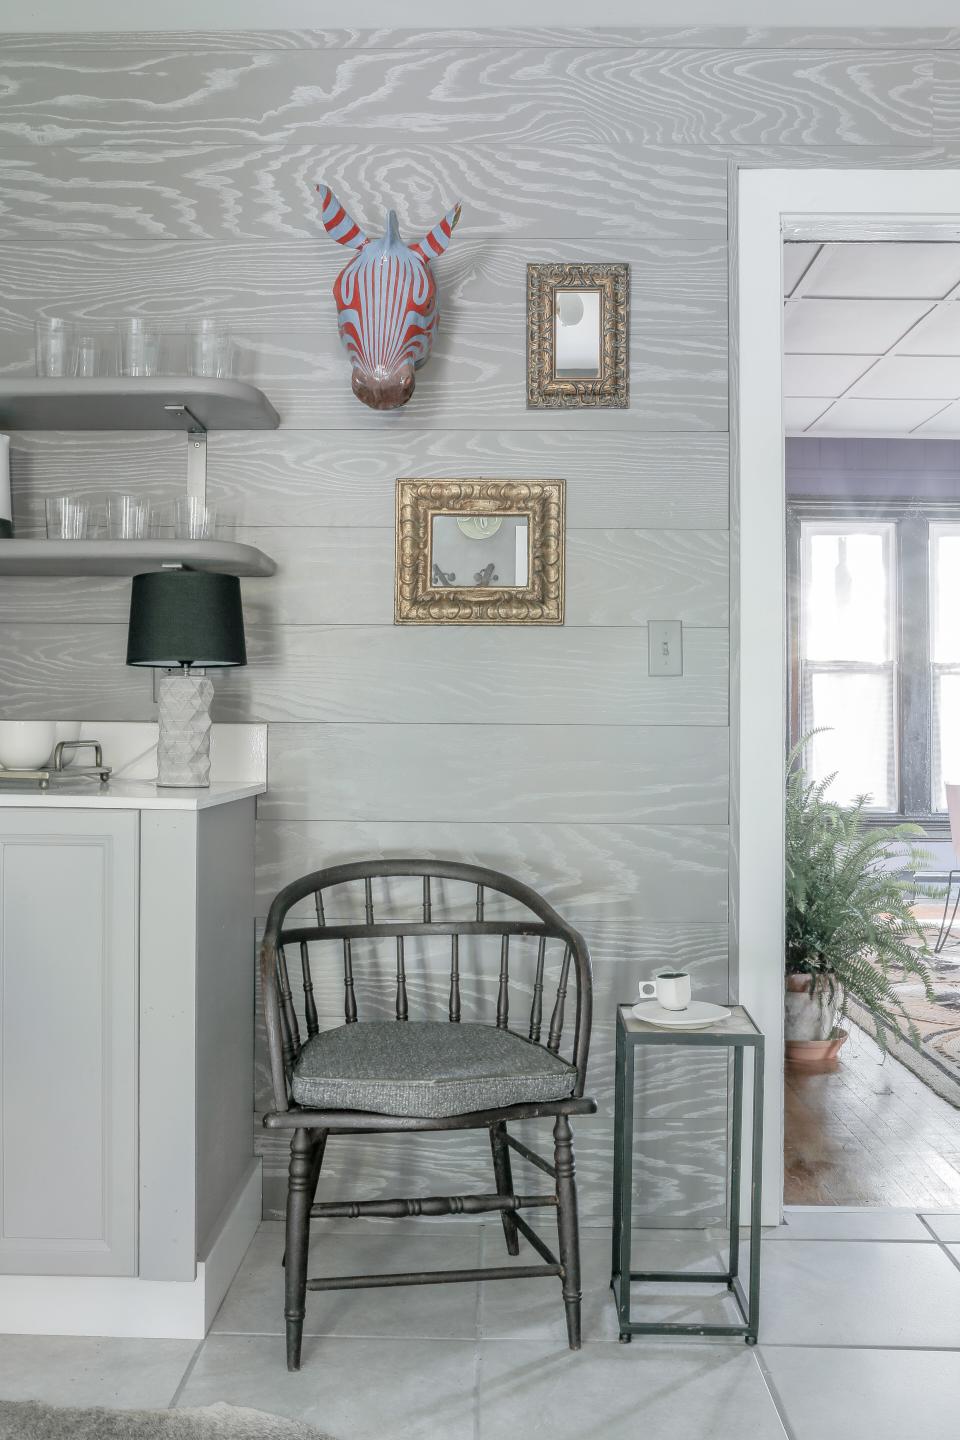 AFTER: Incorporating accessories like a table lamp and mirrors in the kitchen decor make the space feel less utilitarian and more intimate. The cabinet and wall paint color is Sherwin-Williams Proper Gray and the darker accent color used is Sherwin-Williams Mink.